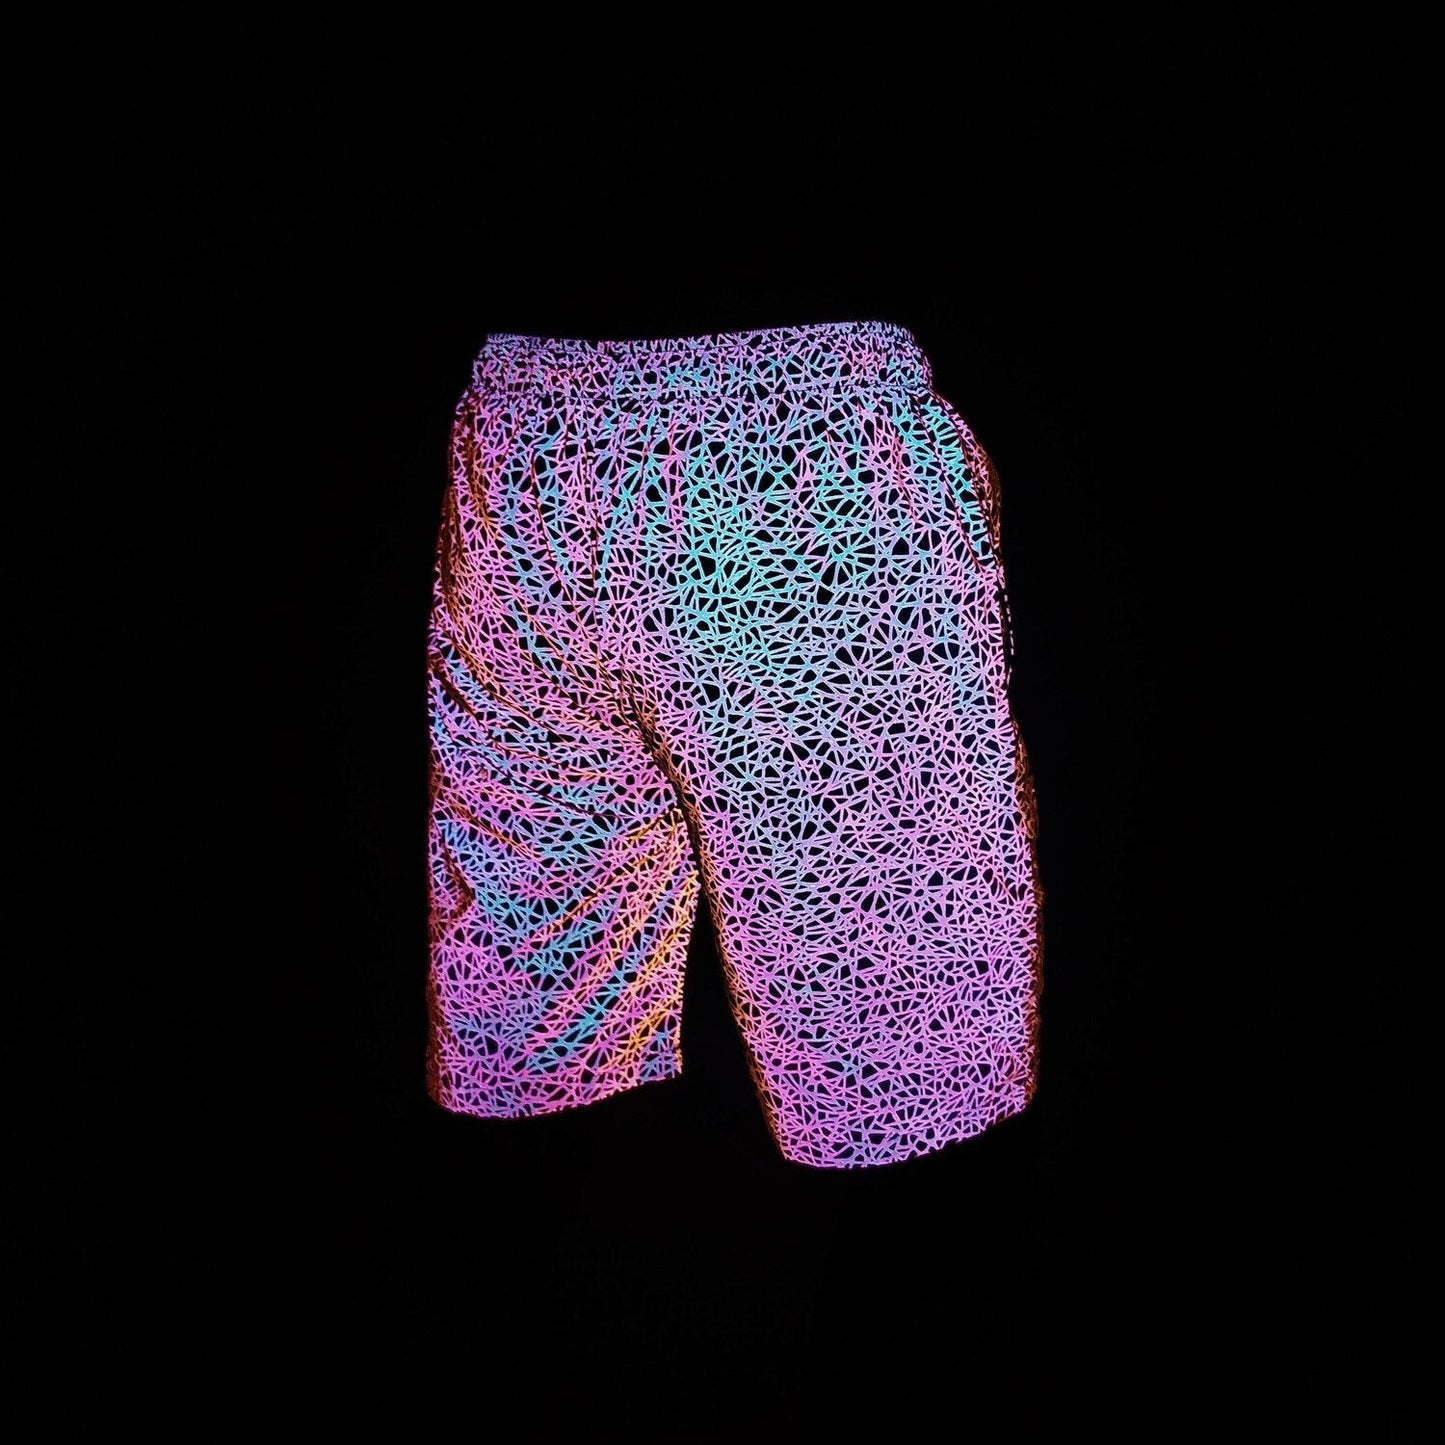 Festival Reflective Men's Shorts - BeExtra! Apparel & More